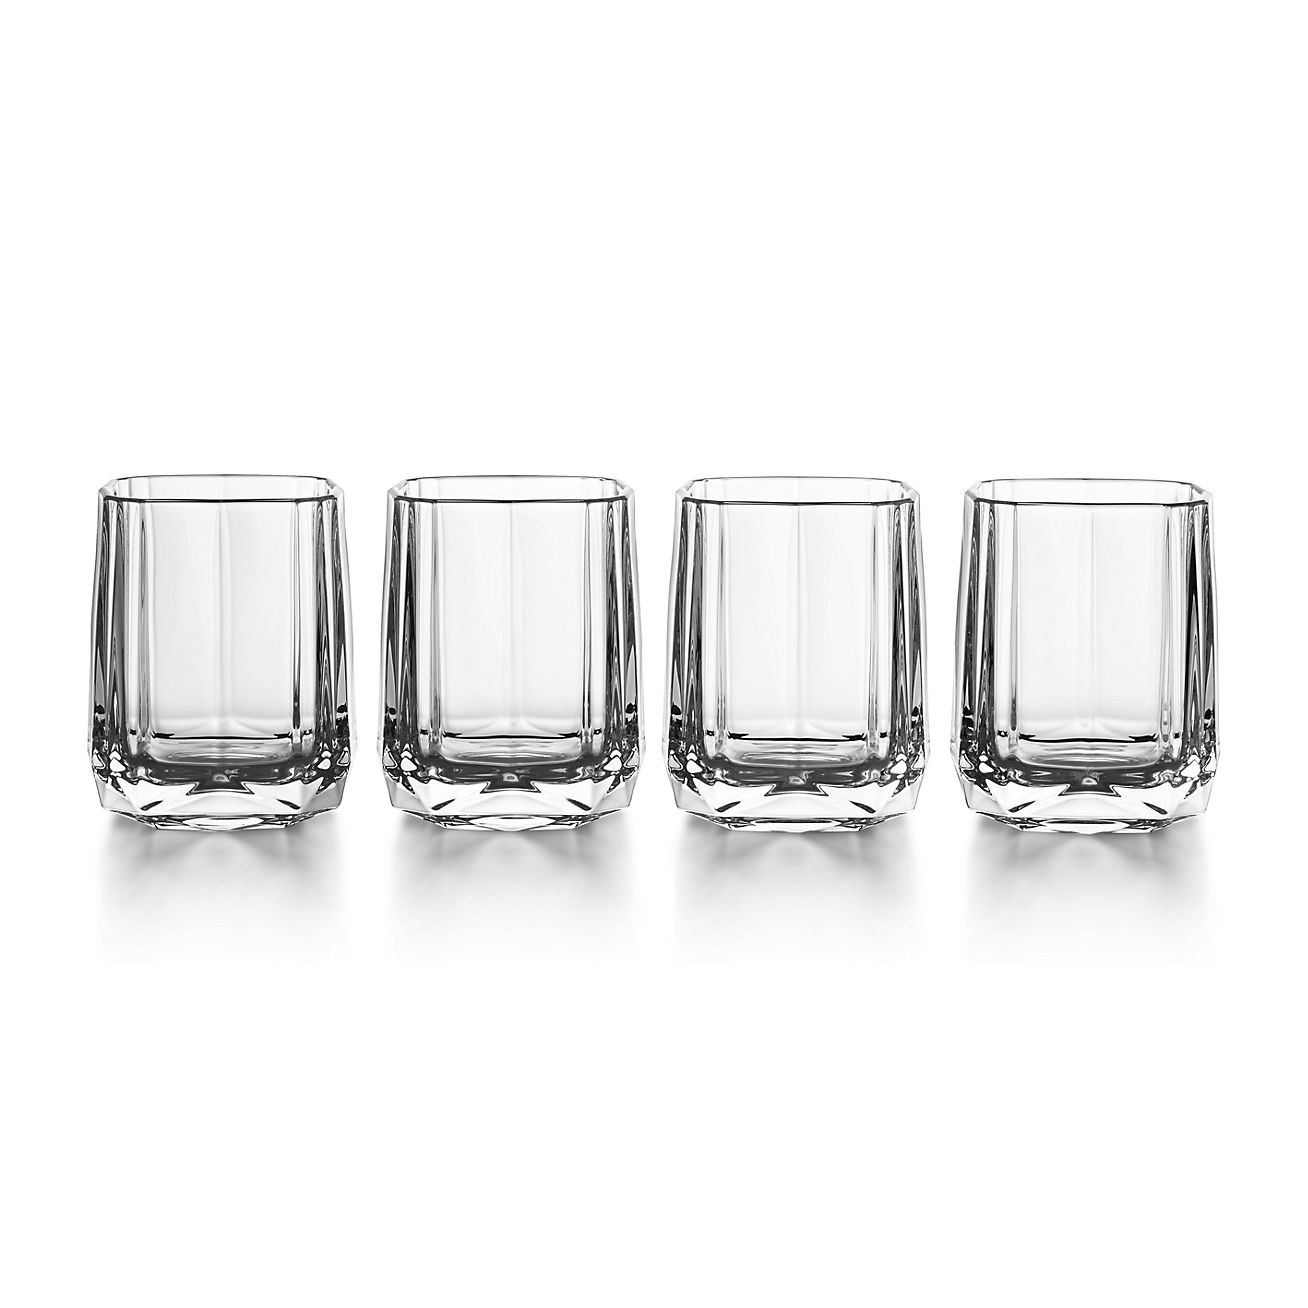 Tiffany Facets Shot Glasses Set of Four, in Crystal Glass | Tiffany & Co.